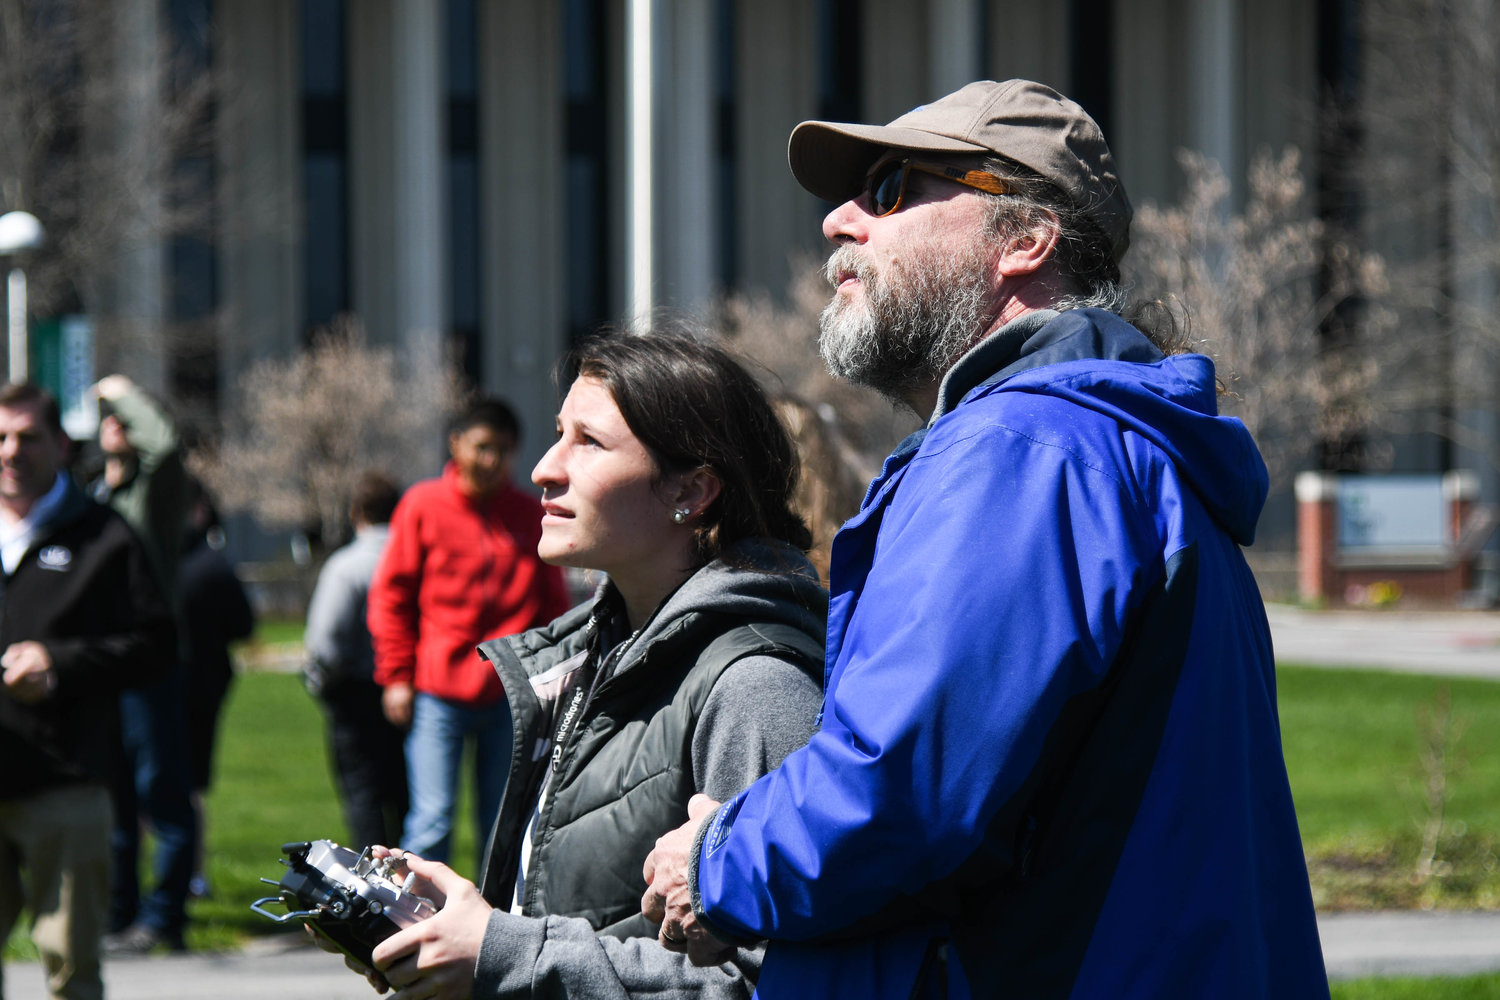 Instructor Bill Judycki helps Cooperstown resident Sarah Feik fly a drone during the 2022 Drone Festival at Mohawk Valley Community College in Utica. The event featured interactive drone demonstrations, racing drone and flight demos, hands-on racing simulators and more. Attendees also had an opportunity to fly a mini drone or hovercraft.